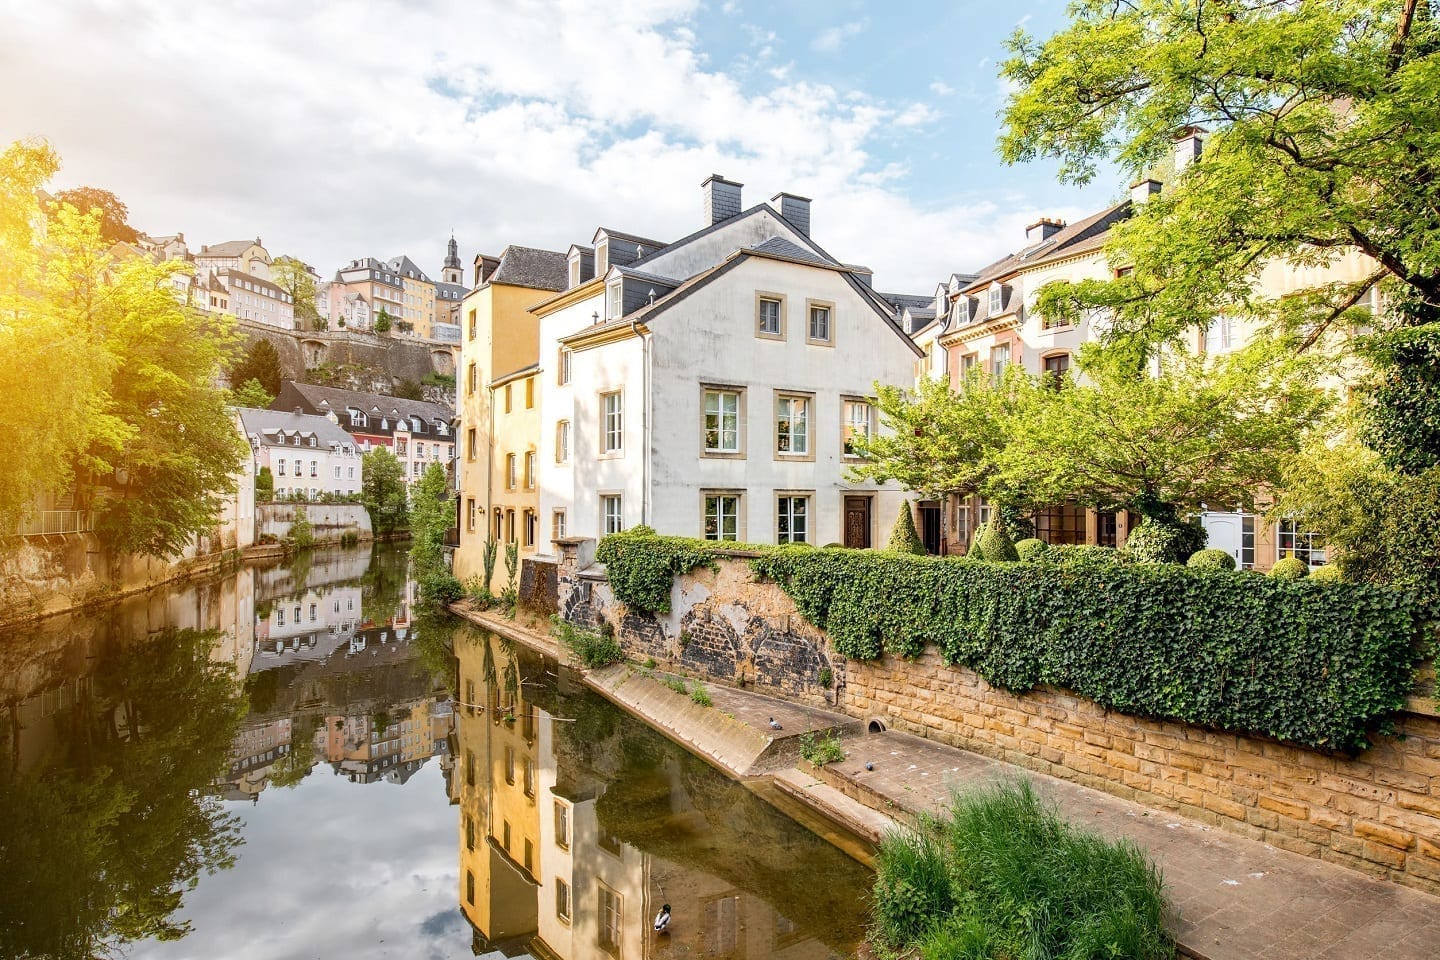 day trip to luxembourg from brussels